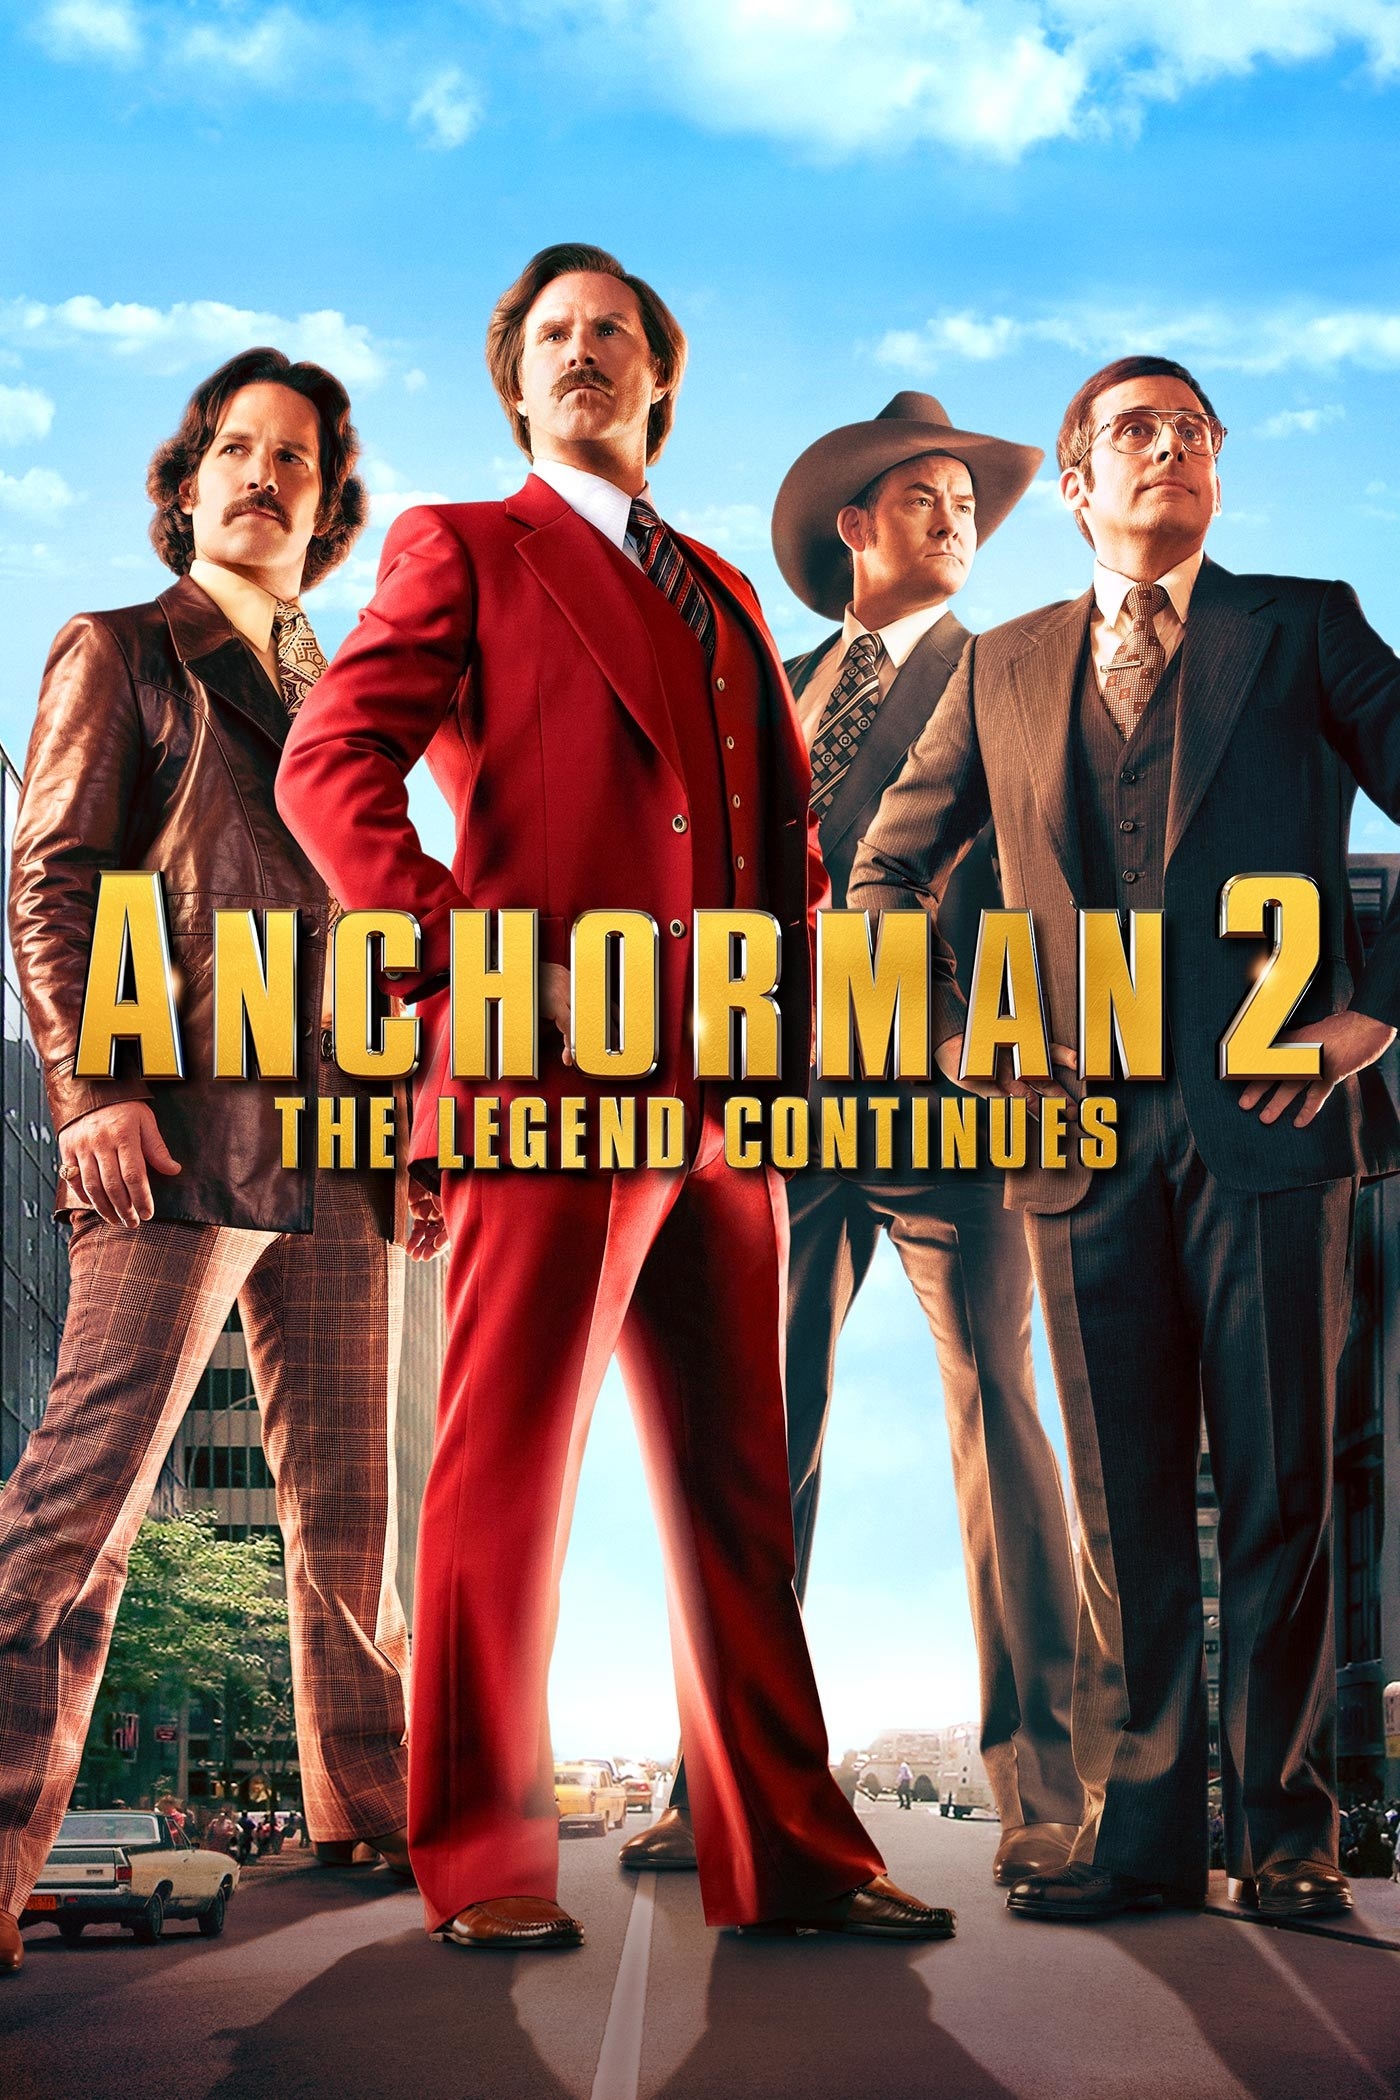 Movie poster for Anchorman 2: The Legend Continues